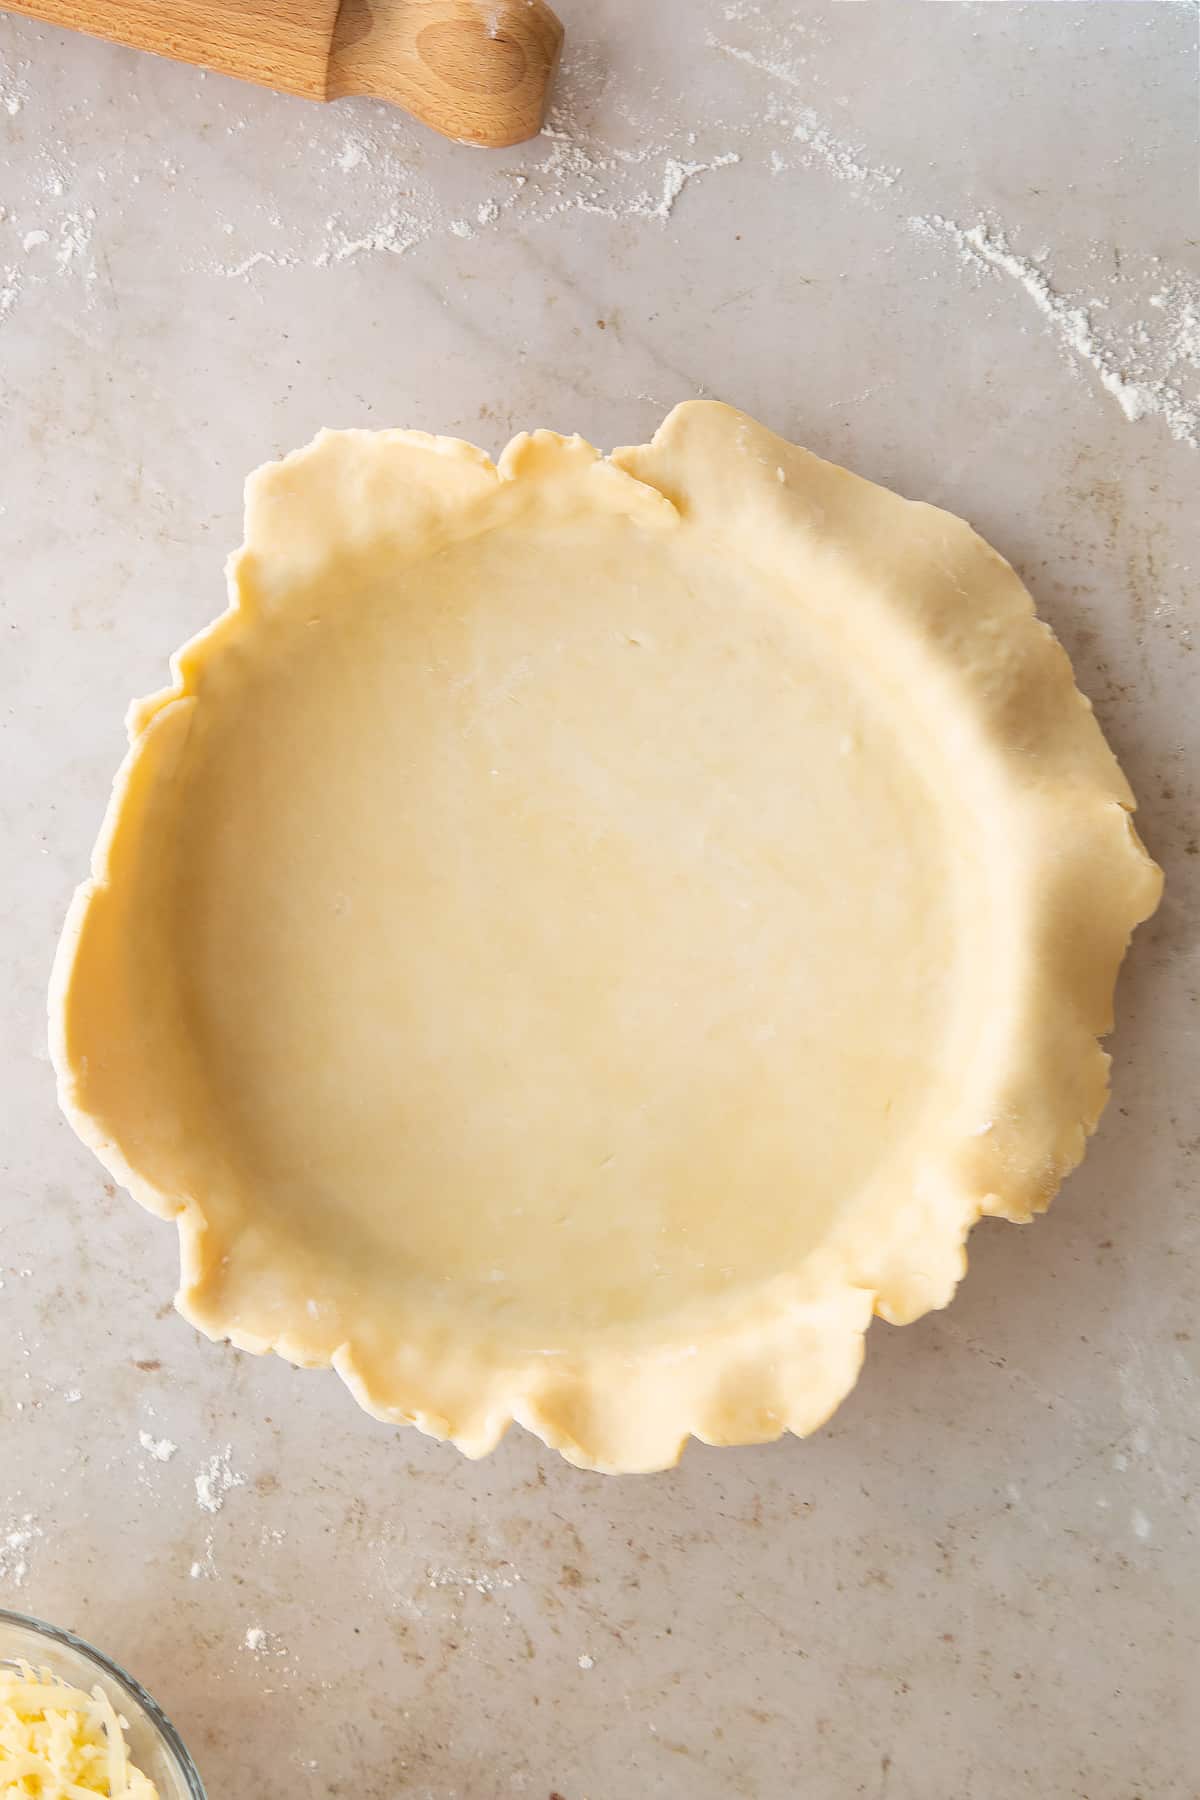 shortcrust pastry loosely pput into a pie dish.